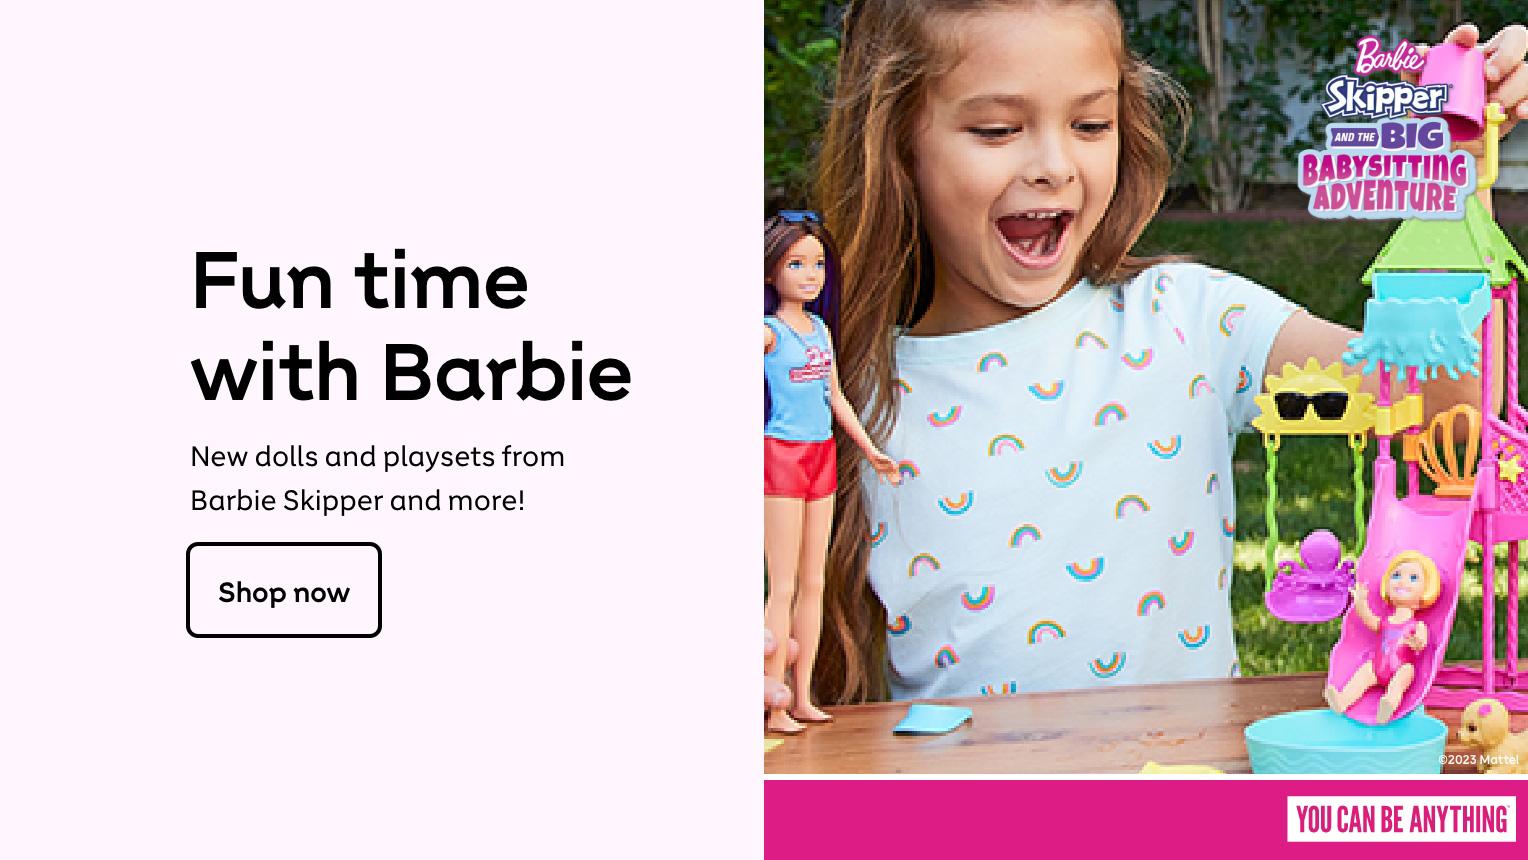 Fun time with Barbie. New dolls and playsets from Barbie Skipper and more! Shop now